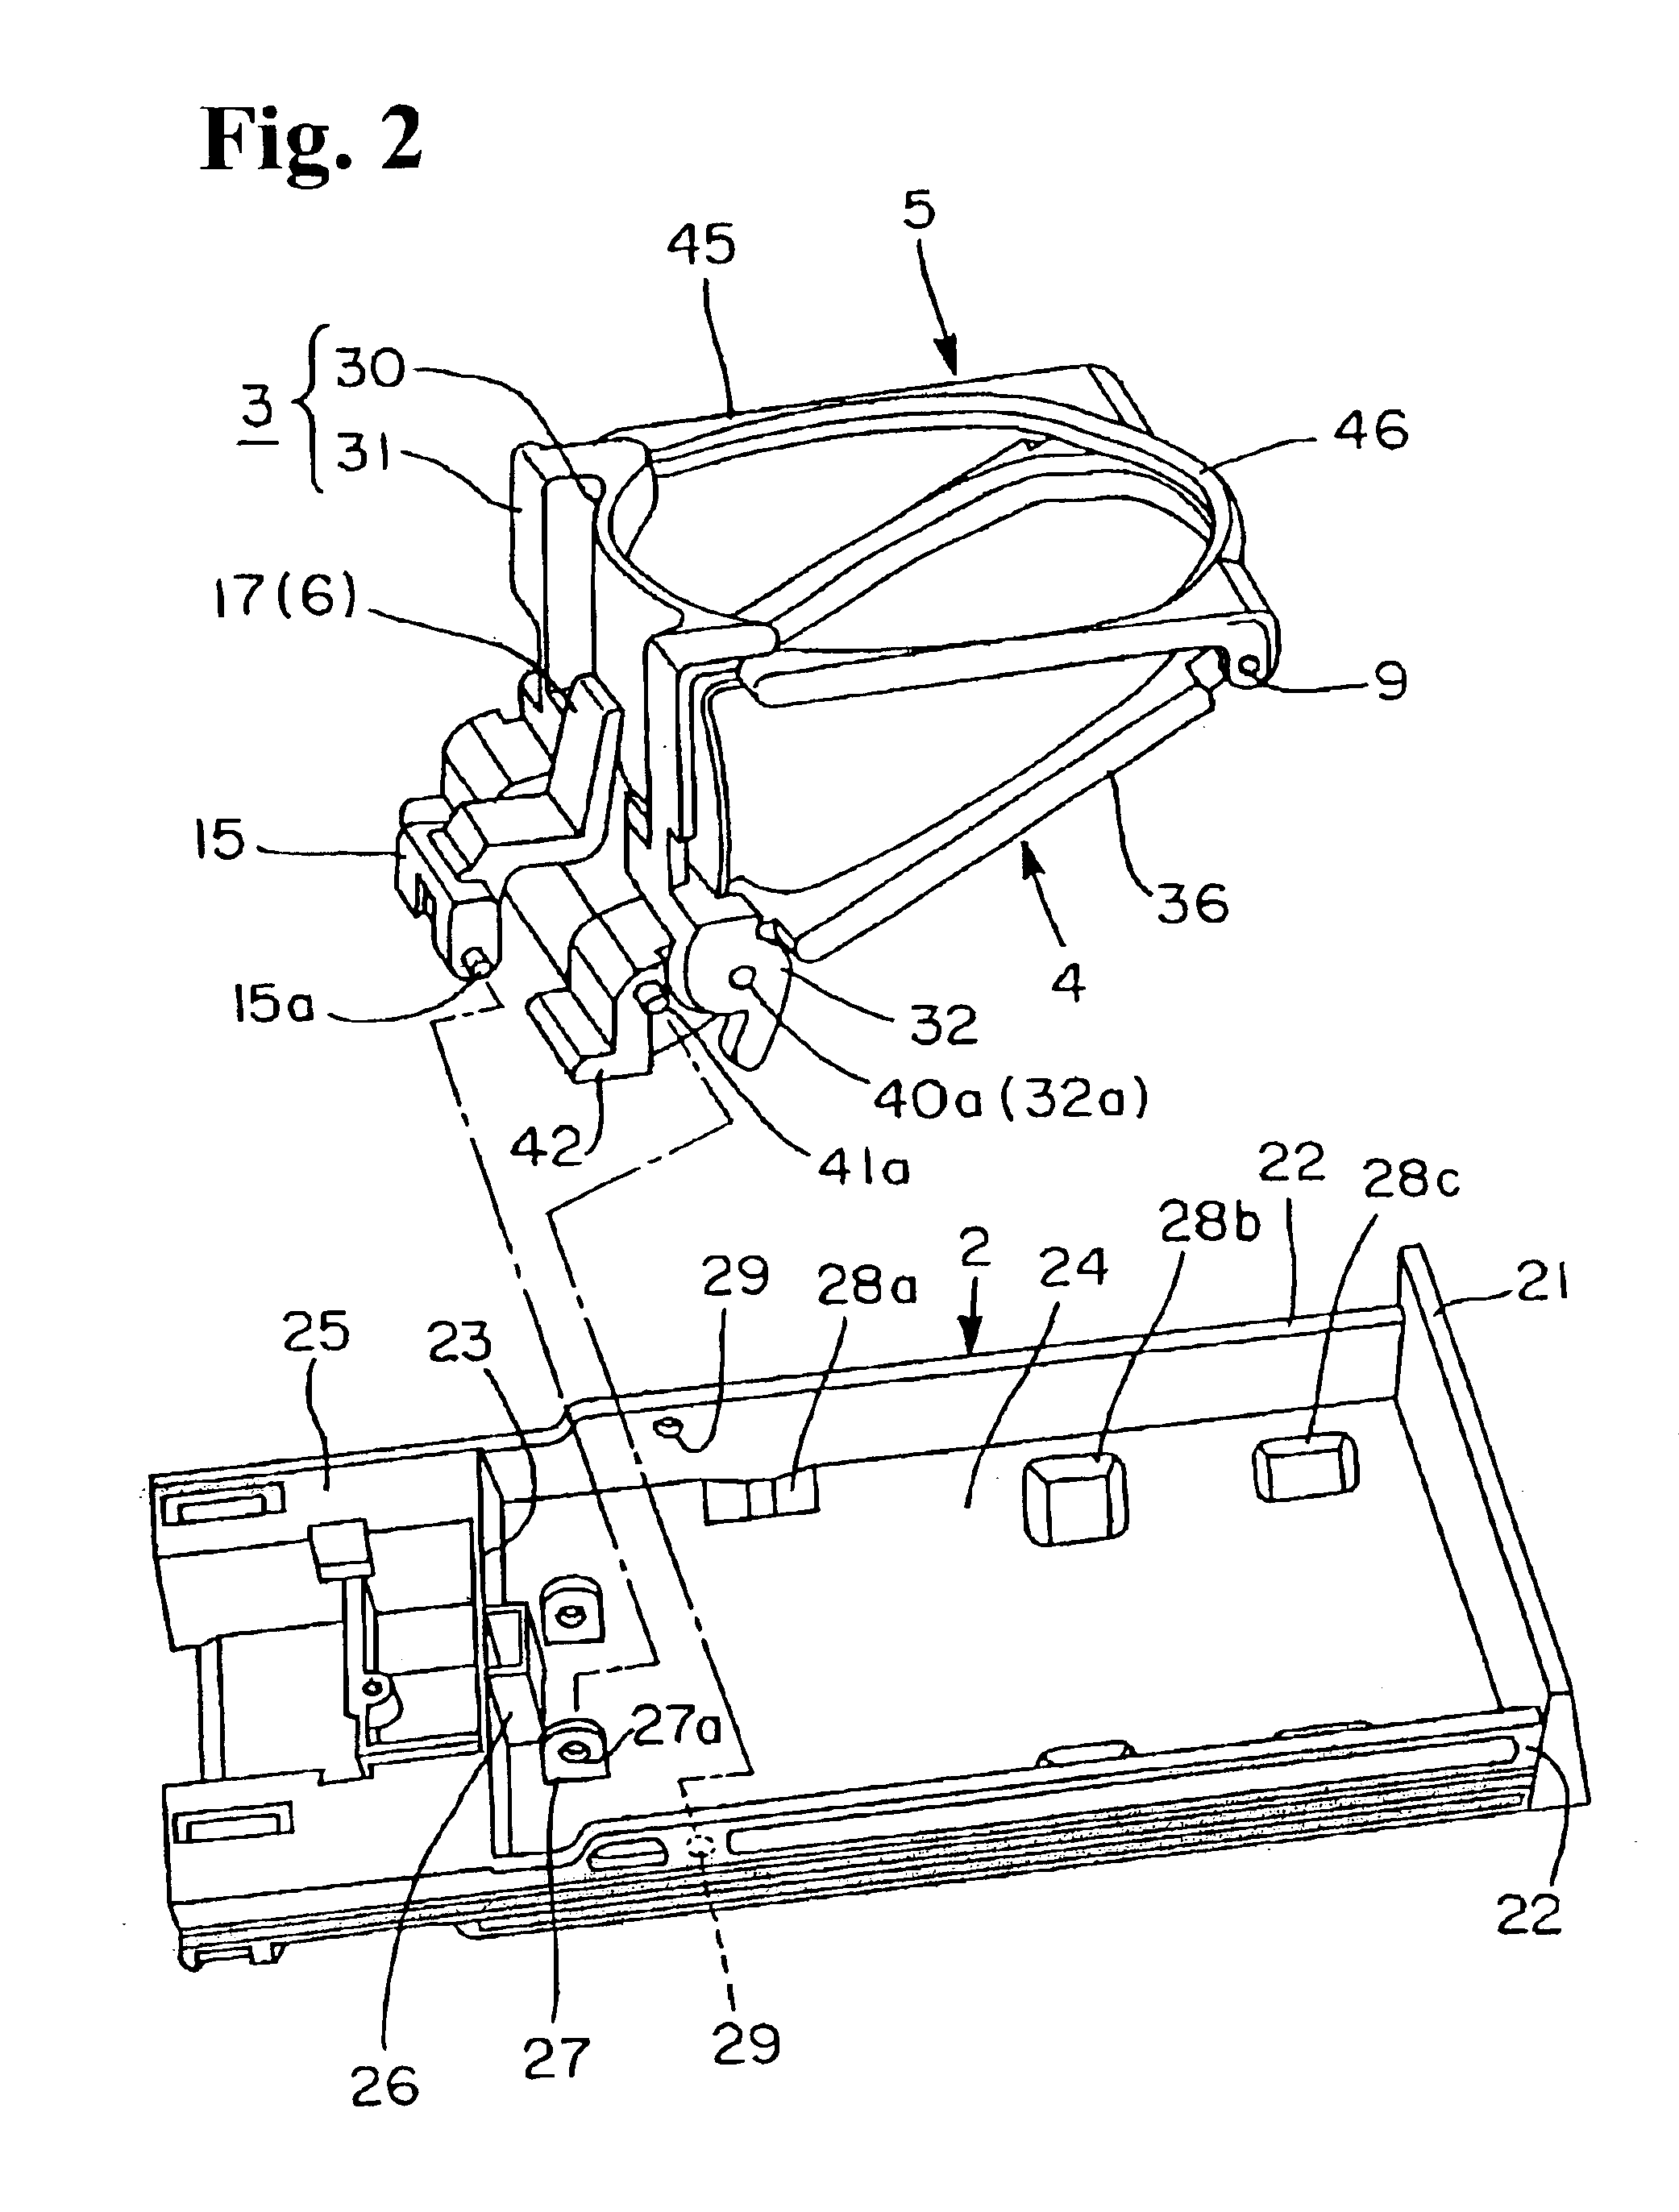 Cup holder device